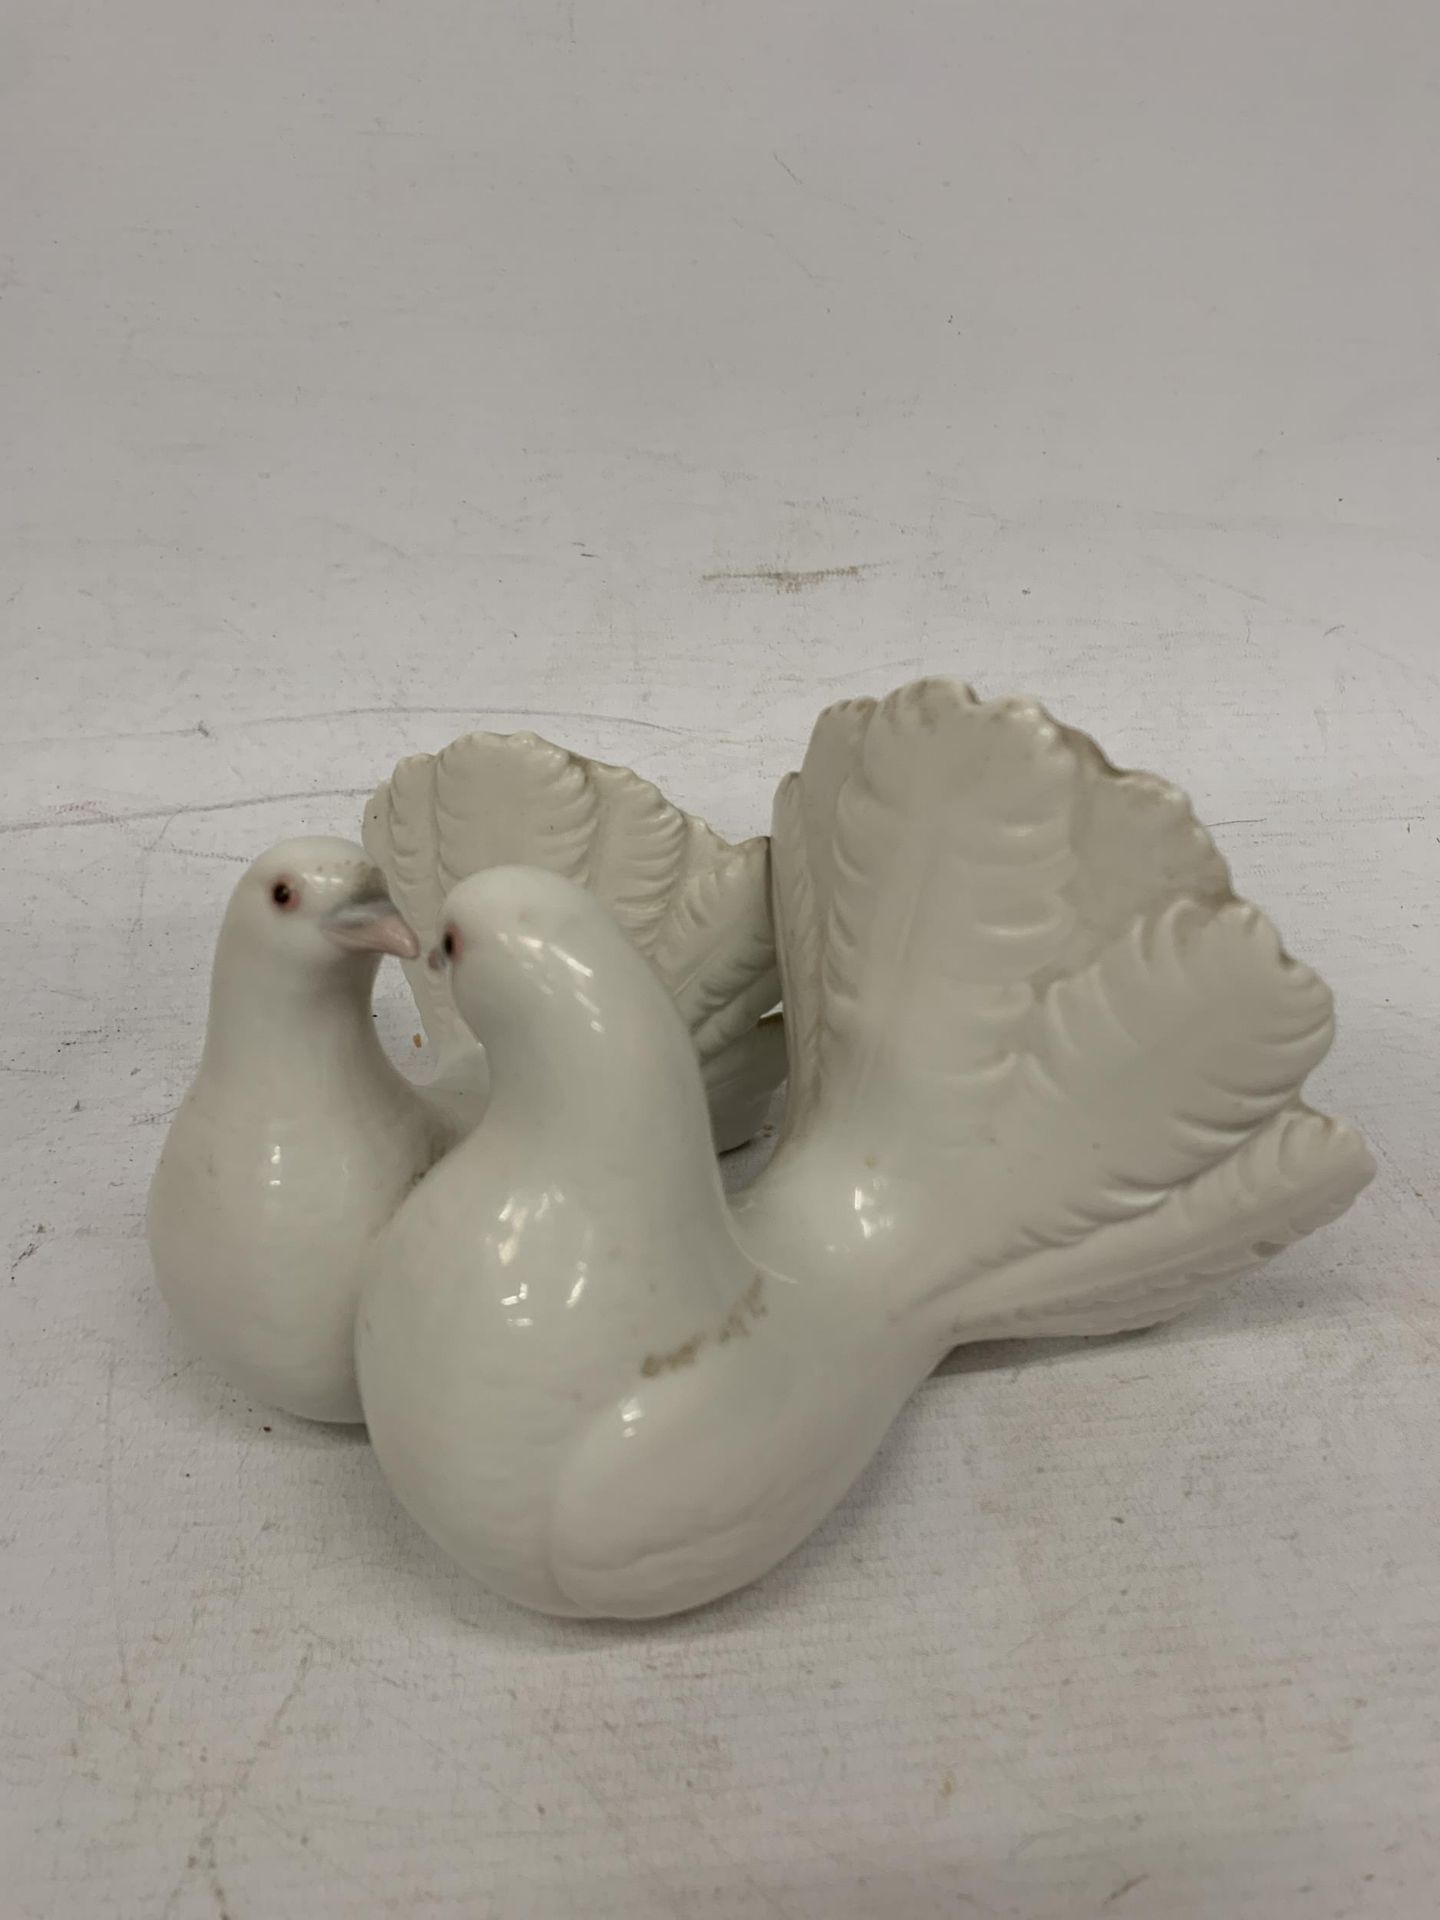 A LADRO COUPLE OF DOVES FIGURE